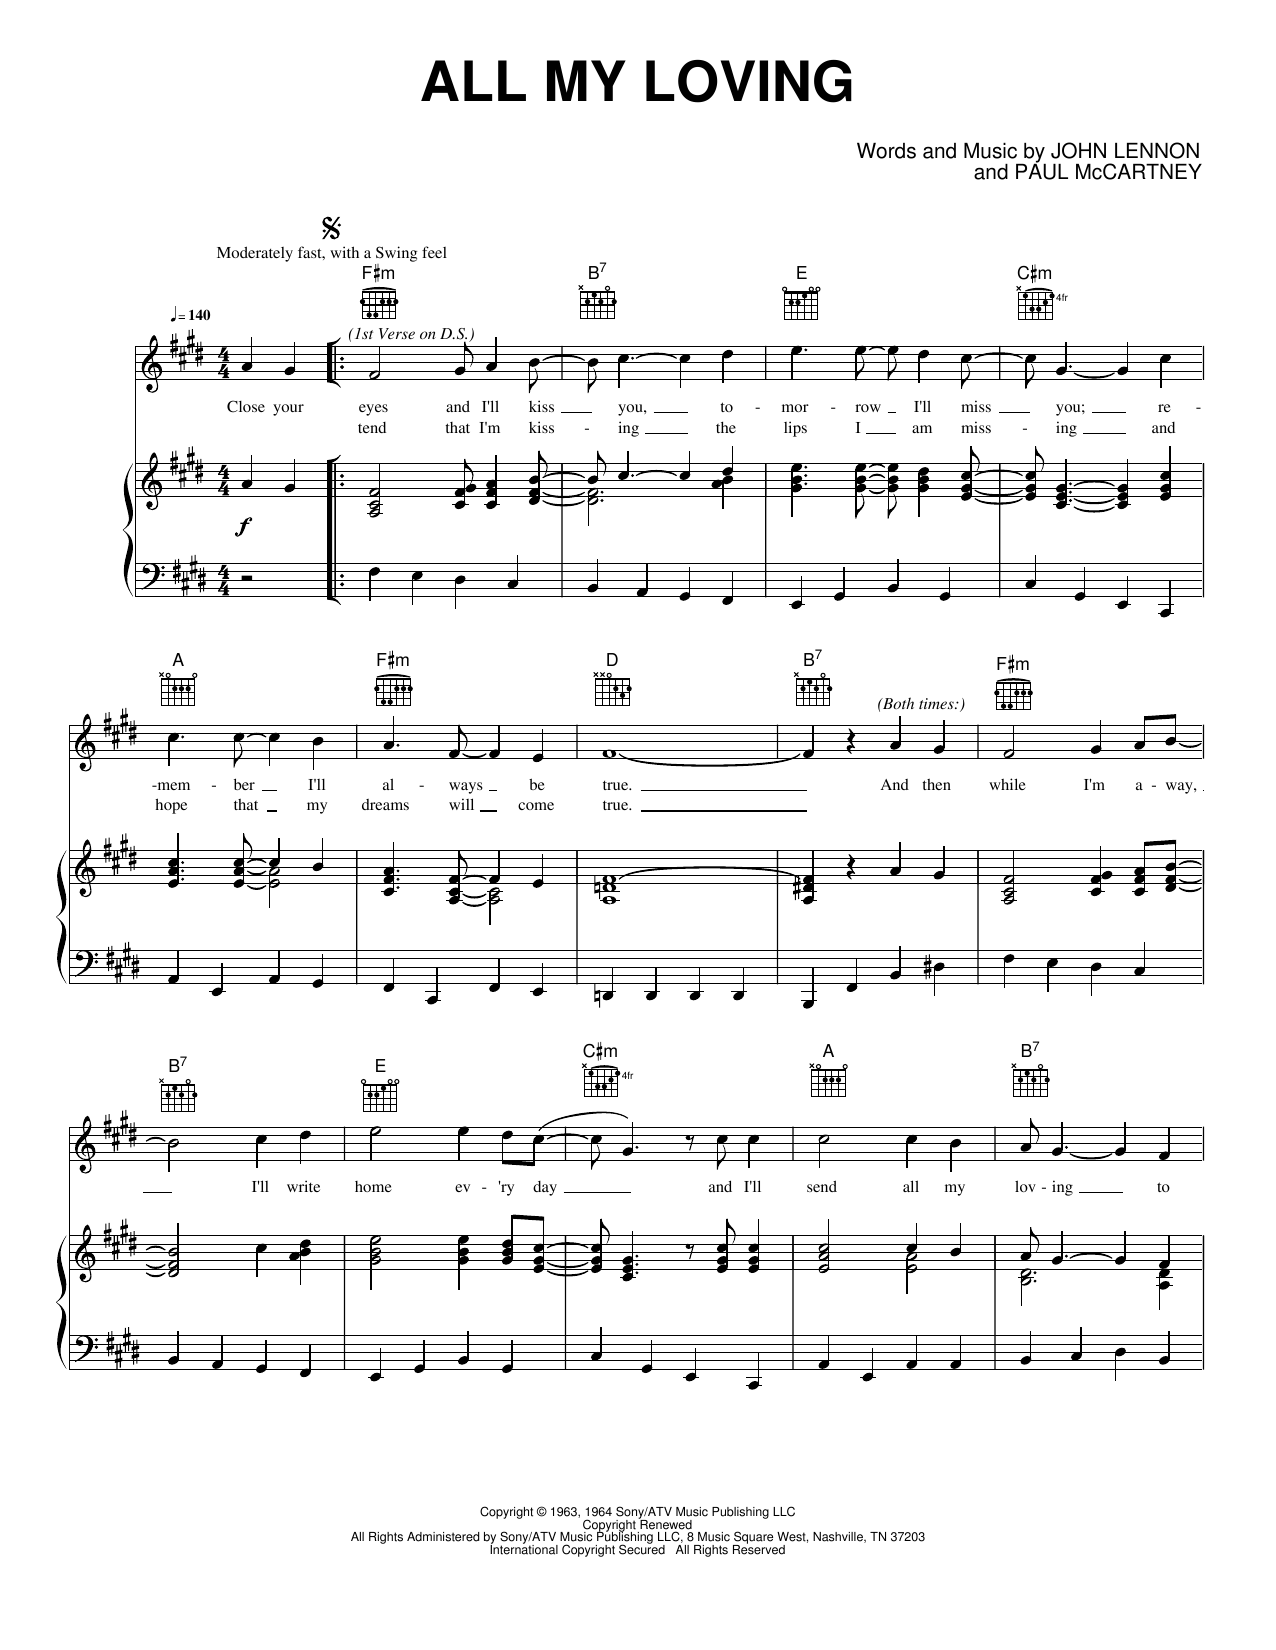 All My Loving Sheet Music By The Beatles For Piano Keyboard And Voice Noteflight Marketplace